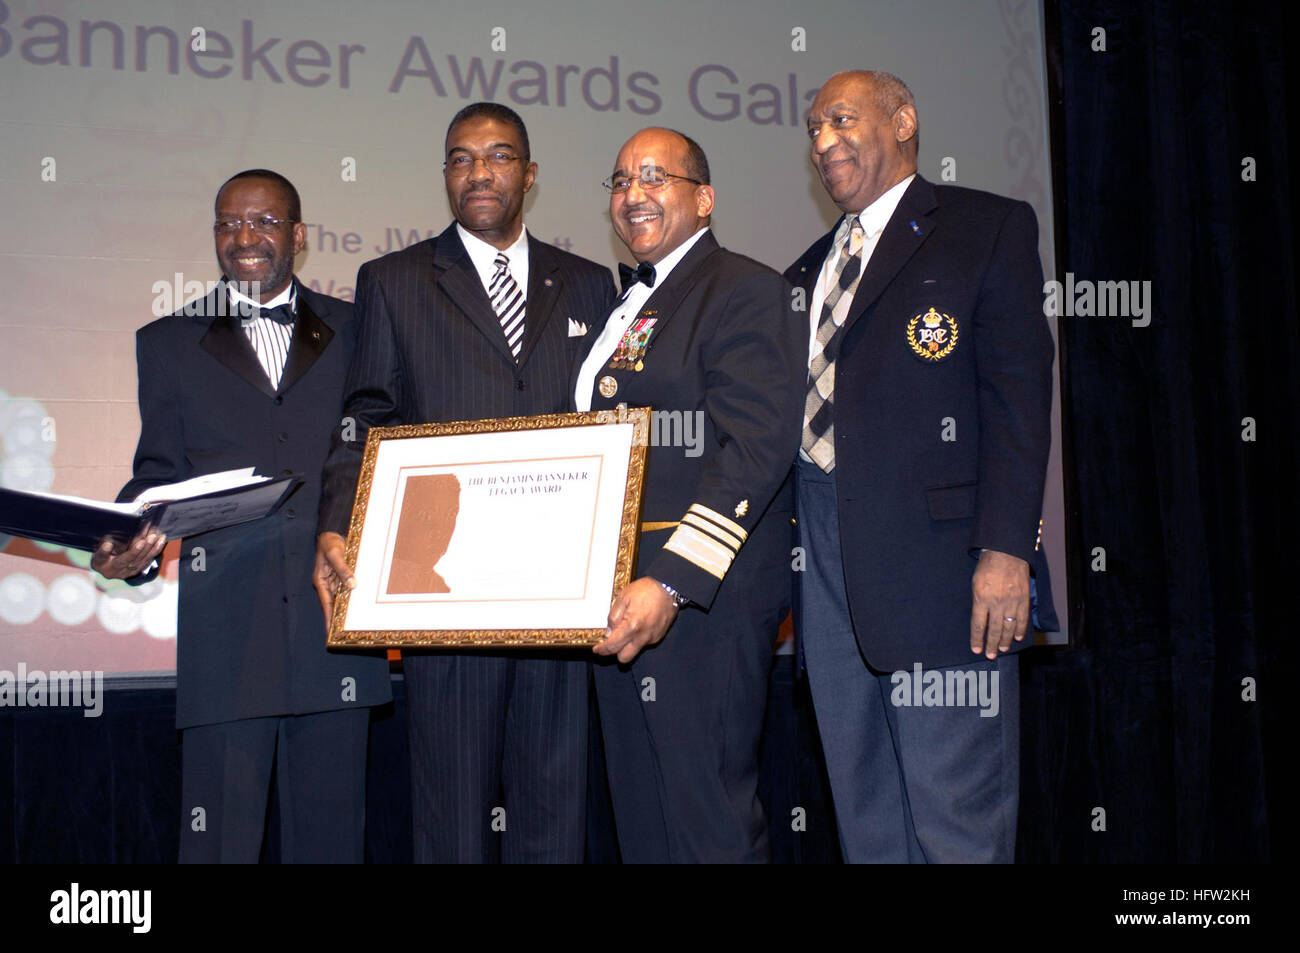 071107-N-8292T-082 WASHINGTON, (Nov. 7, 2007) - Vice Adm. Adam M. Robinson Jr., the first black surgeon general of the Navy, is presented the 'Celebrate Our Passion for Excellence in Ph.D. Pursuits' award by (from left to right) Kojo Nnamdi, radio personality; Dr. Robert Shepard, executive director of Science and Engineering Alliance, Inc.; and Dr. Bill Cosby, philanthropist and entertainer. The gala was hosted by the Benjamin Banneker Institute of Science and Technology to showcase prominent blacks in the fields of science, technology, engineering and math. U.S. Navy photo by Mass Communicati Stock Photo